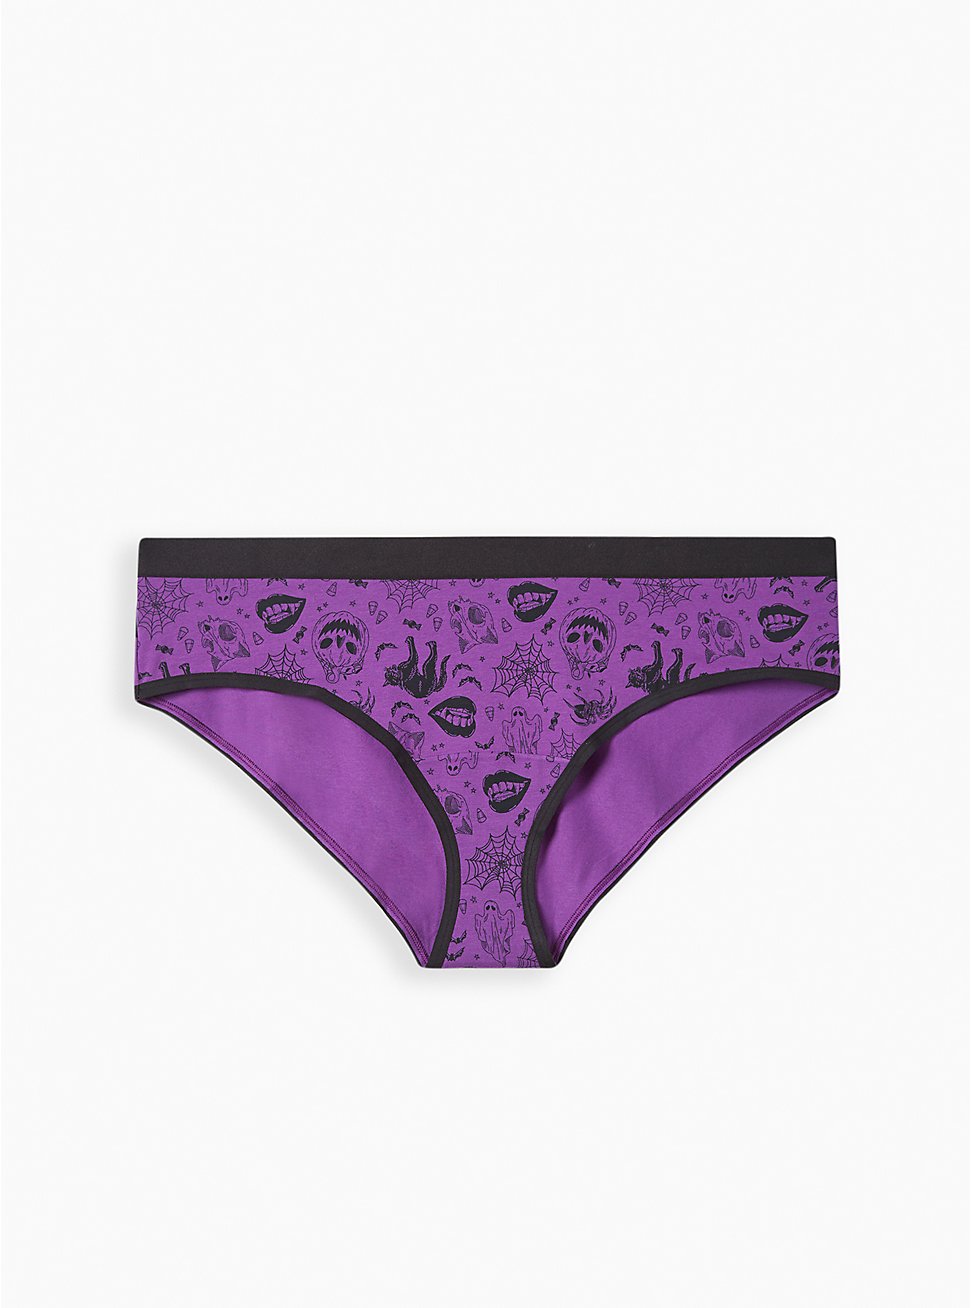 Cotton Mid-Rise Hipster Panty, HALLOWEEN ICONS PINK, hi-res